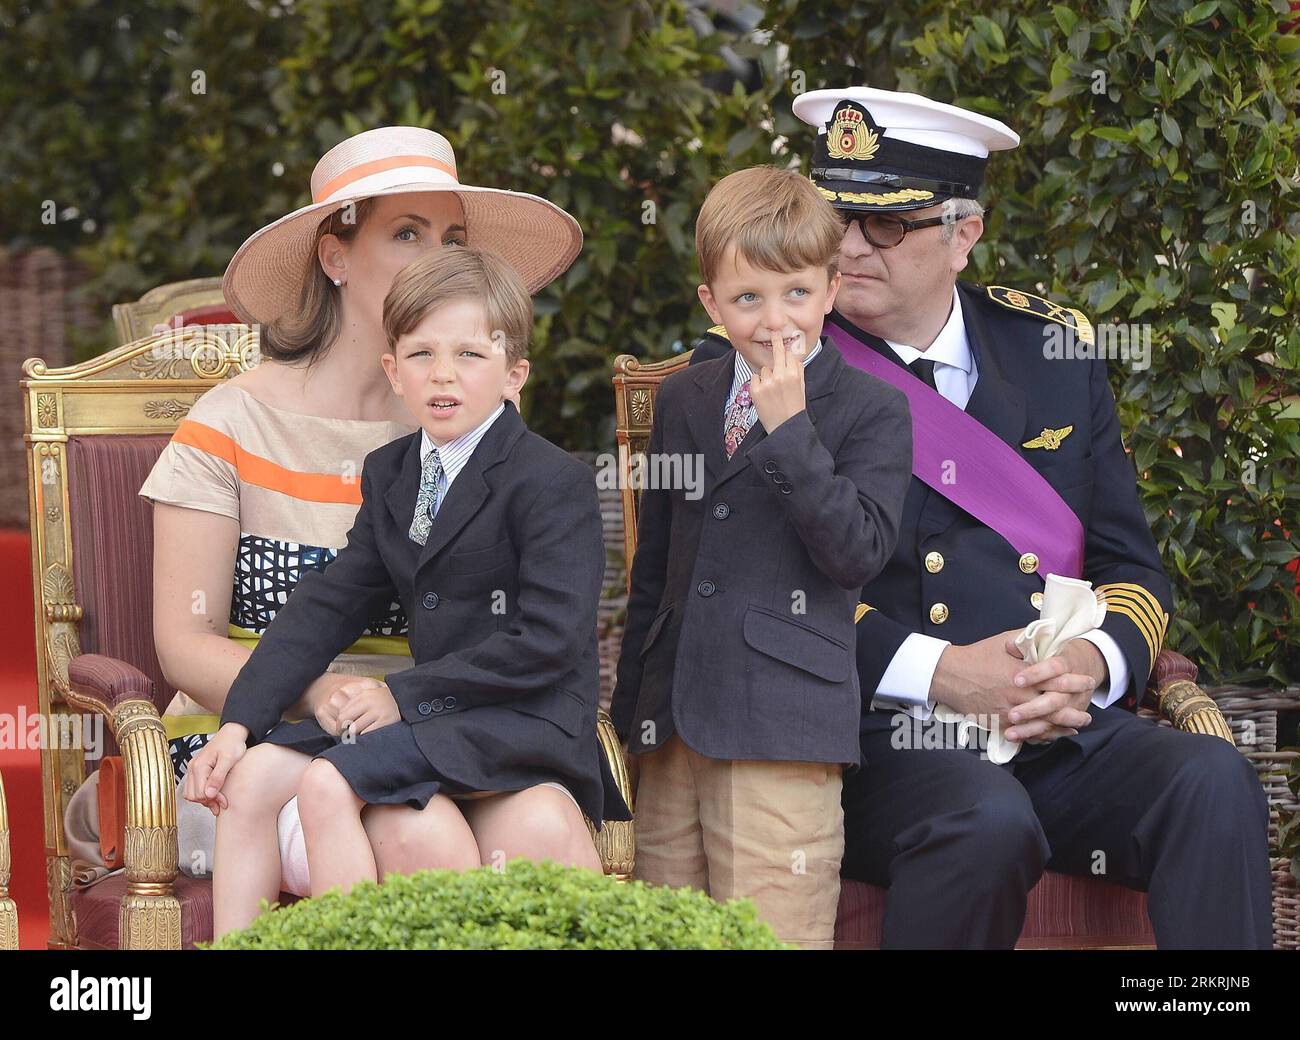 Bildnummer: 58270843  Datum: 21.07.2012  Copyright: imago/Xinhua (120721) -- BRUSSELS, July 21, 2012 (Xinhua) -- Belgian Prince Laurant (1st R), Princess Claire (1st L), their son Prince Nicolas (2nd R) and Prince Aymeric (2nd L) watch the military parade in Brussels, capital of Belgium, July 21, 2012, on the occasion of the Belgian National Day. (Xinhua/Wu Wei) BELGIUM-NATIONAL DAY-PARADE PUBLICATIONxNOTxINxCHN People Entertainment Adel BEL Nationalfeiertag x1x xst 2012 quer Highlight kurios Komik  o0 Familie,privat, Kind Sohn, Frau Ehefrau Mann Ehemann     58270843 Date 21 07 2012 Copyright Stock Photo